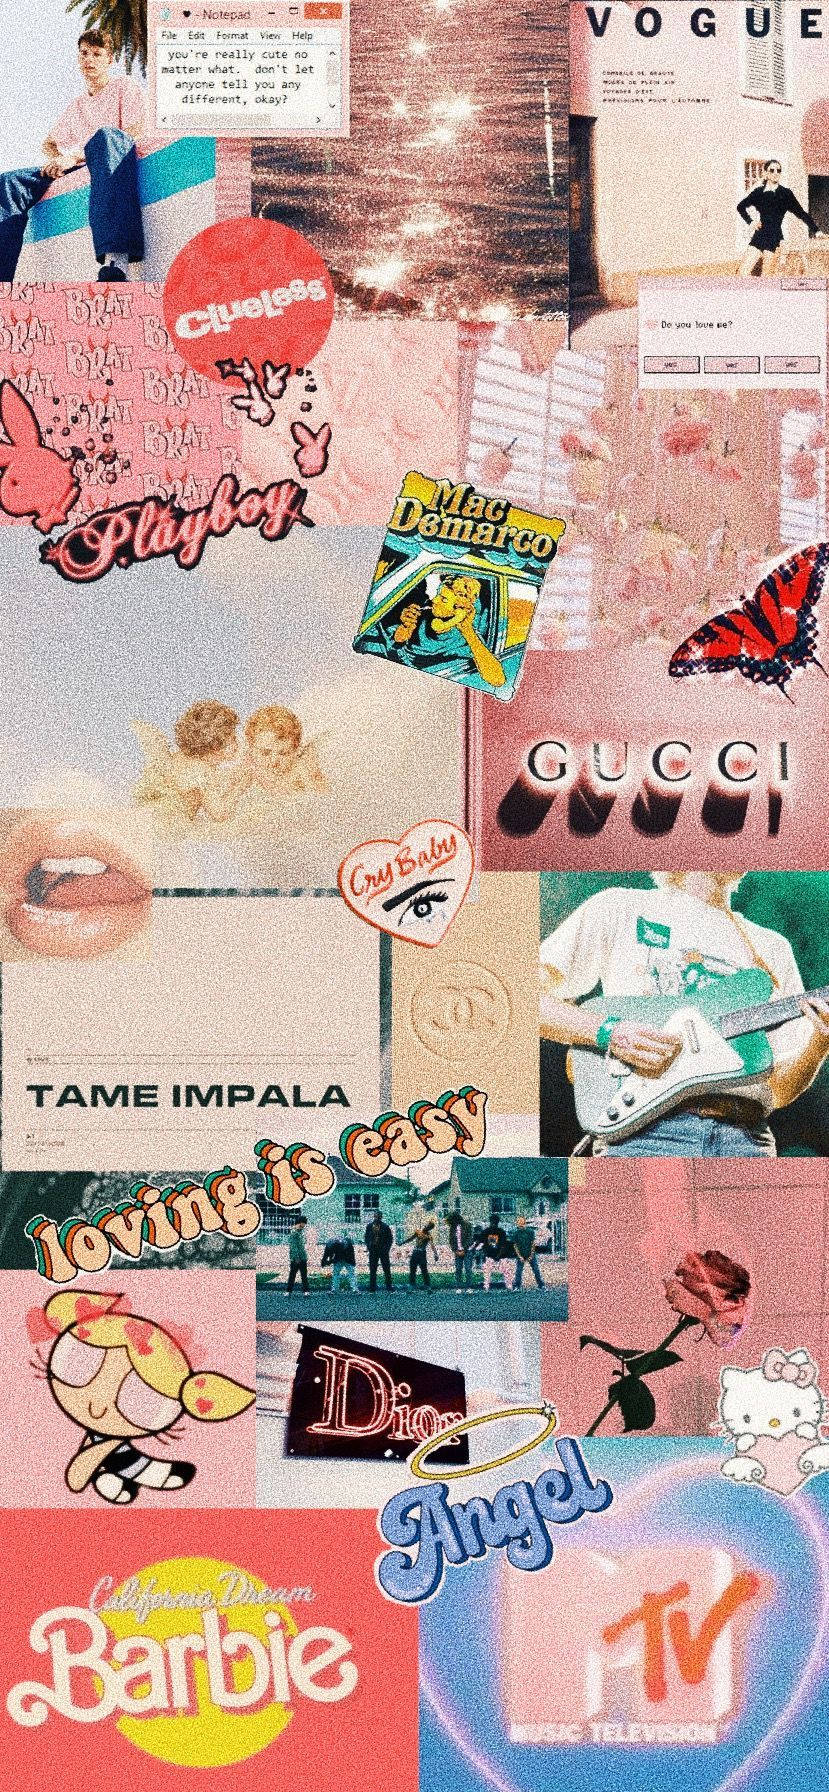 GUCCI Wallpapers for iPhone, Android, Desktop & Tablet